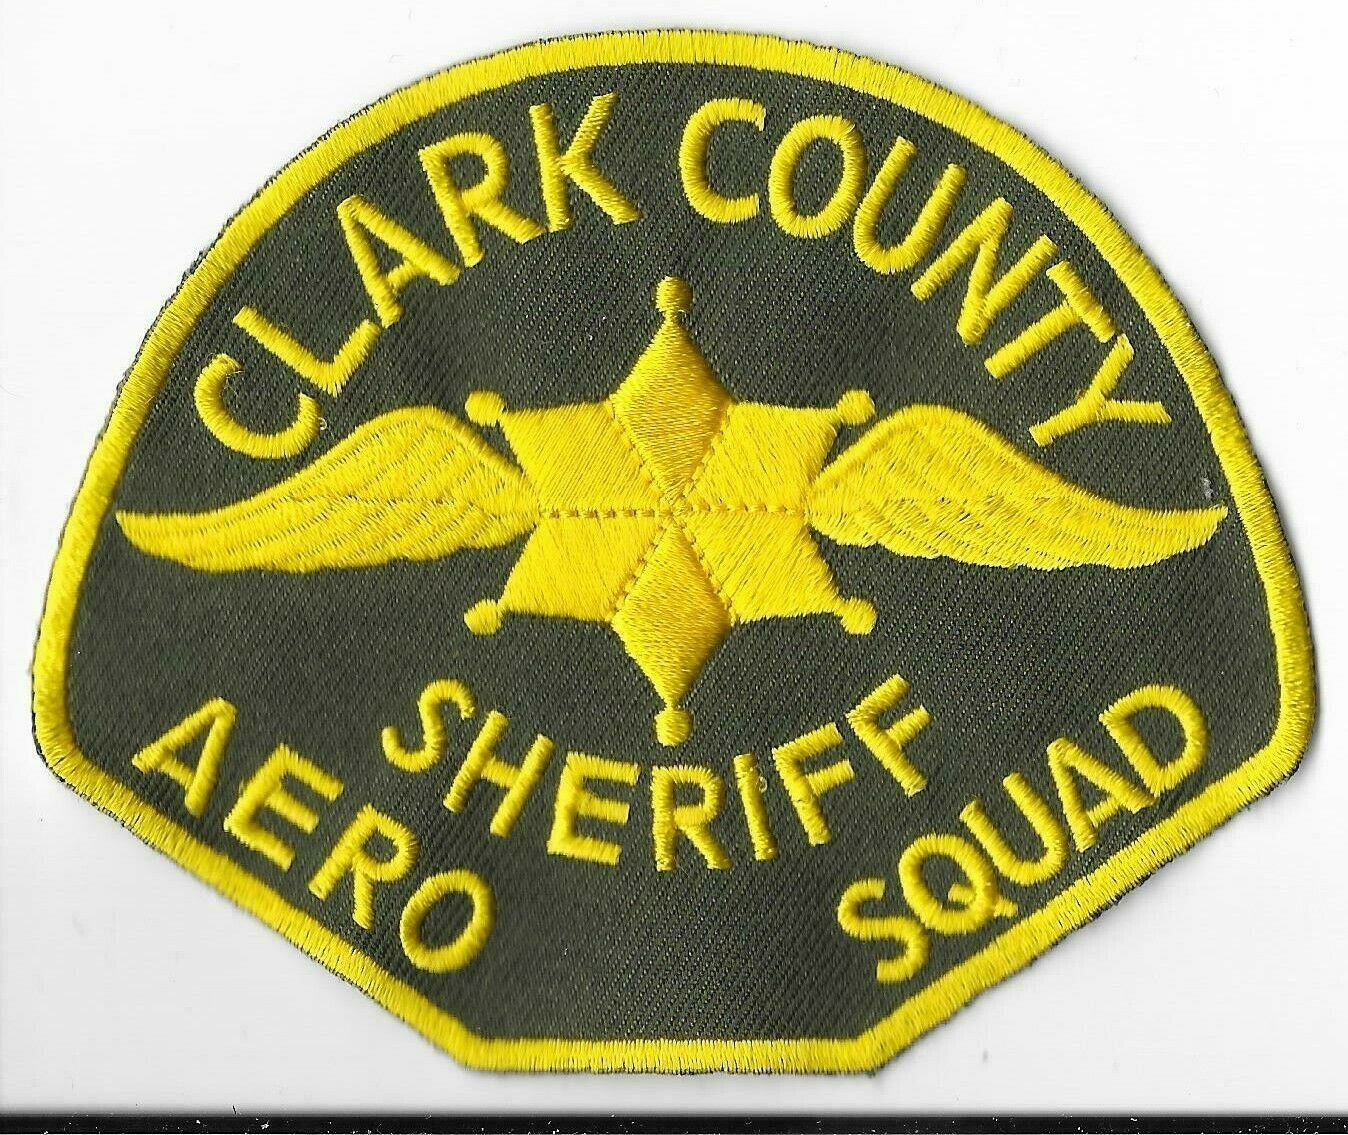 Clark County Sheriff's Office Aero Squad, Nevada Shoulder Patch